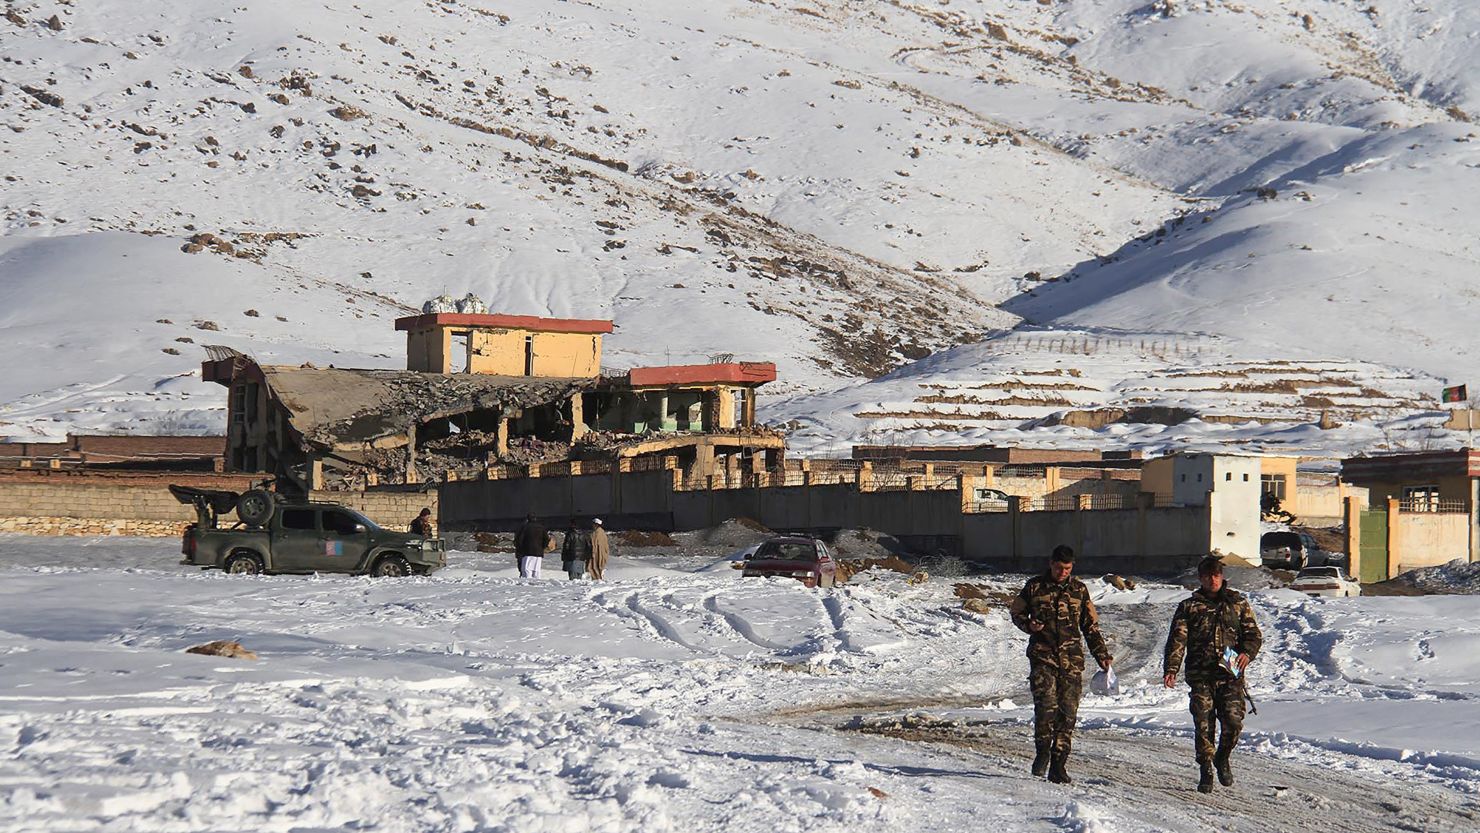 Afghan security forces walks near a site after a car bomb attack on a military base in the central province of Maidan Wardak on January 21, 2019.  